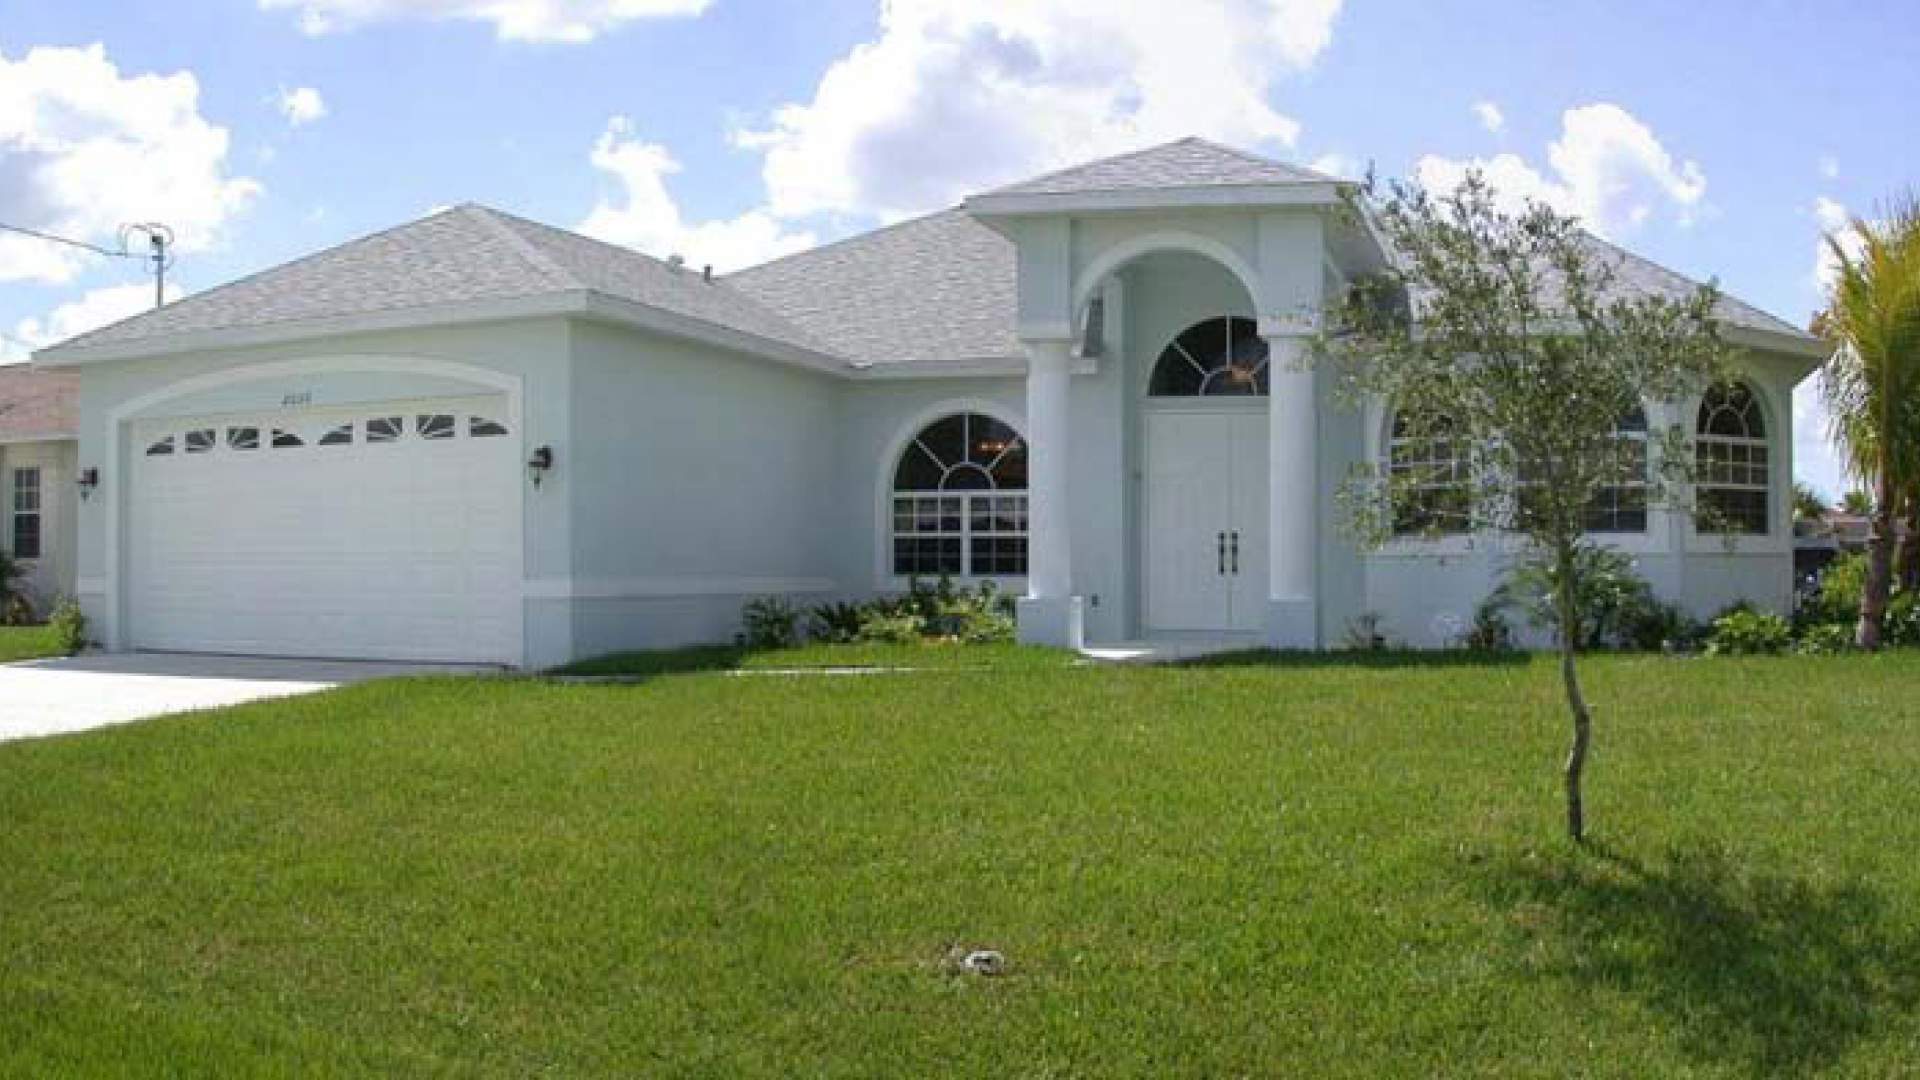 Villa Sanddollar is located in a very beautiful neighborhood in SE Cape Coral